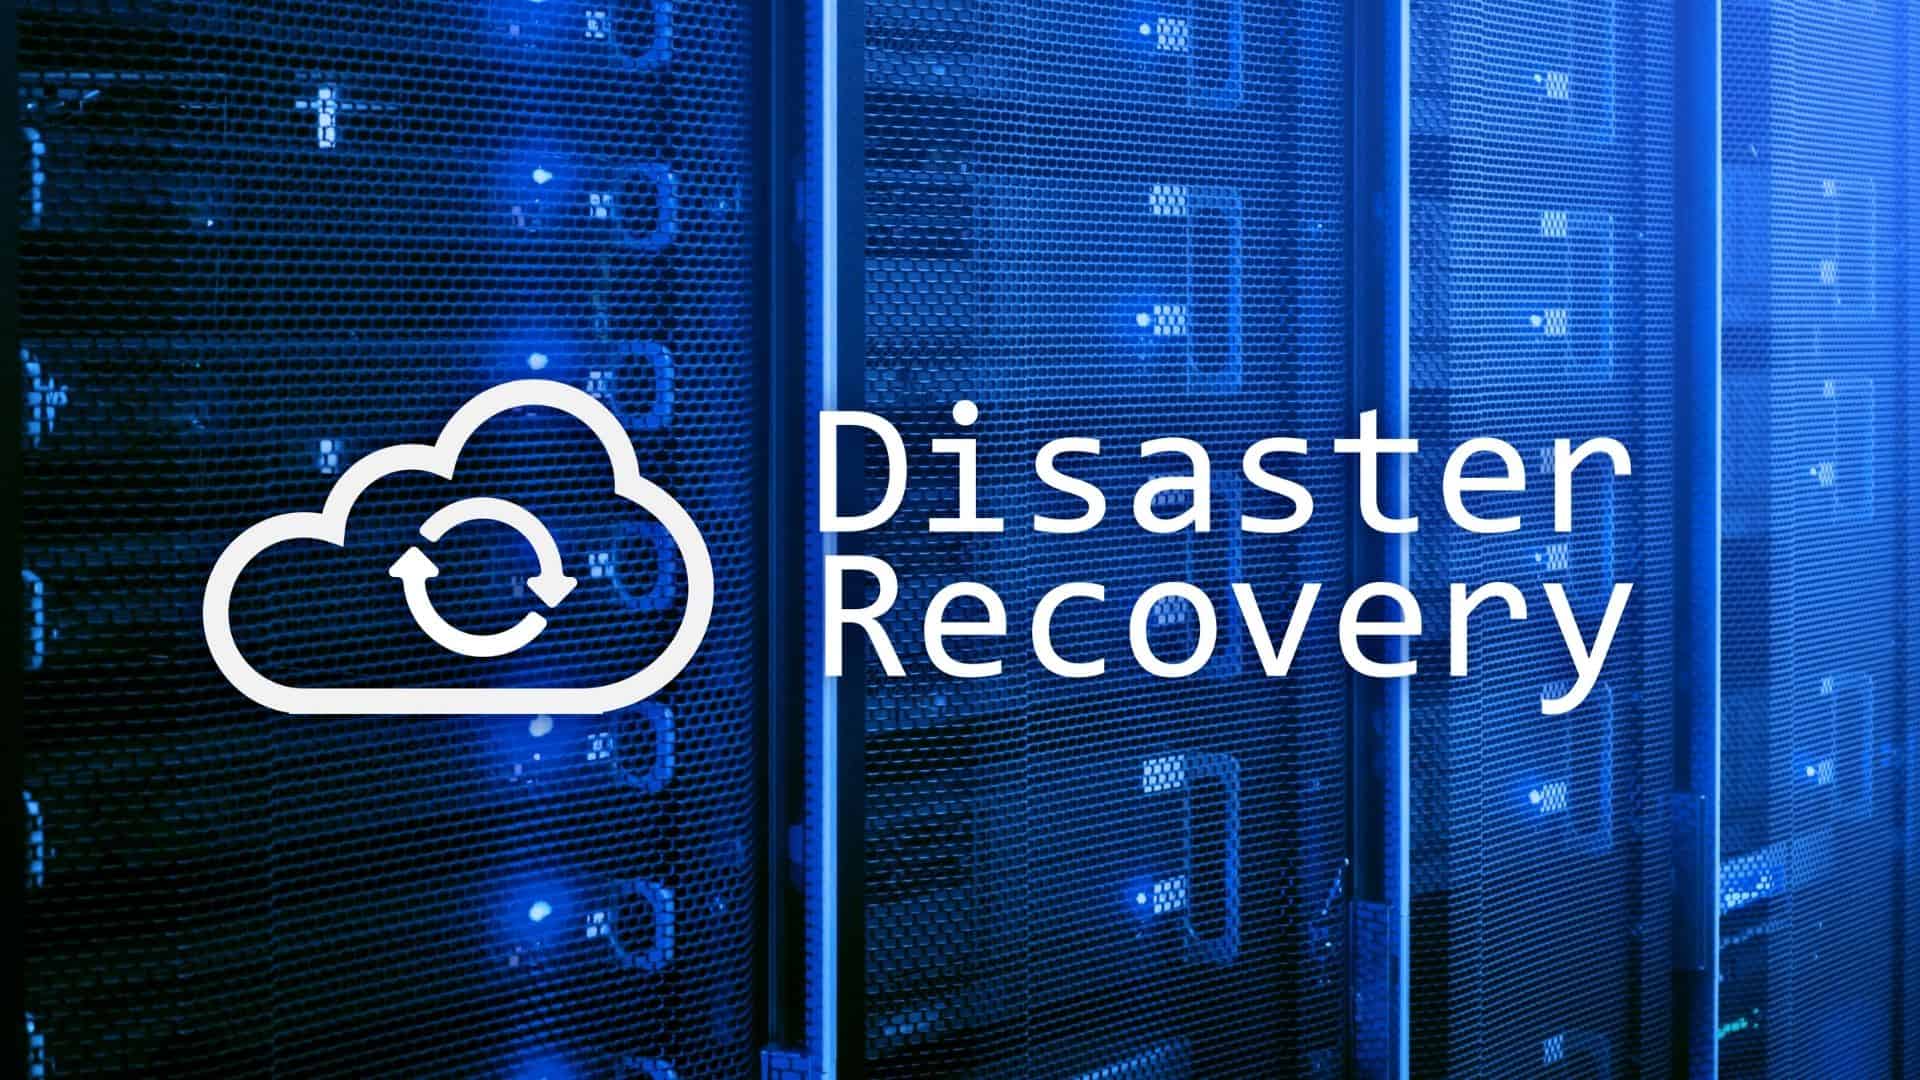 How to Create a Disaster Recovery Plan to Minimize Business Disruption